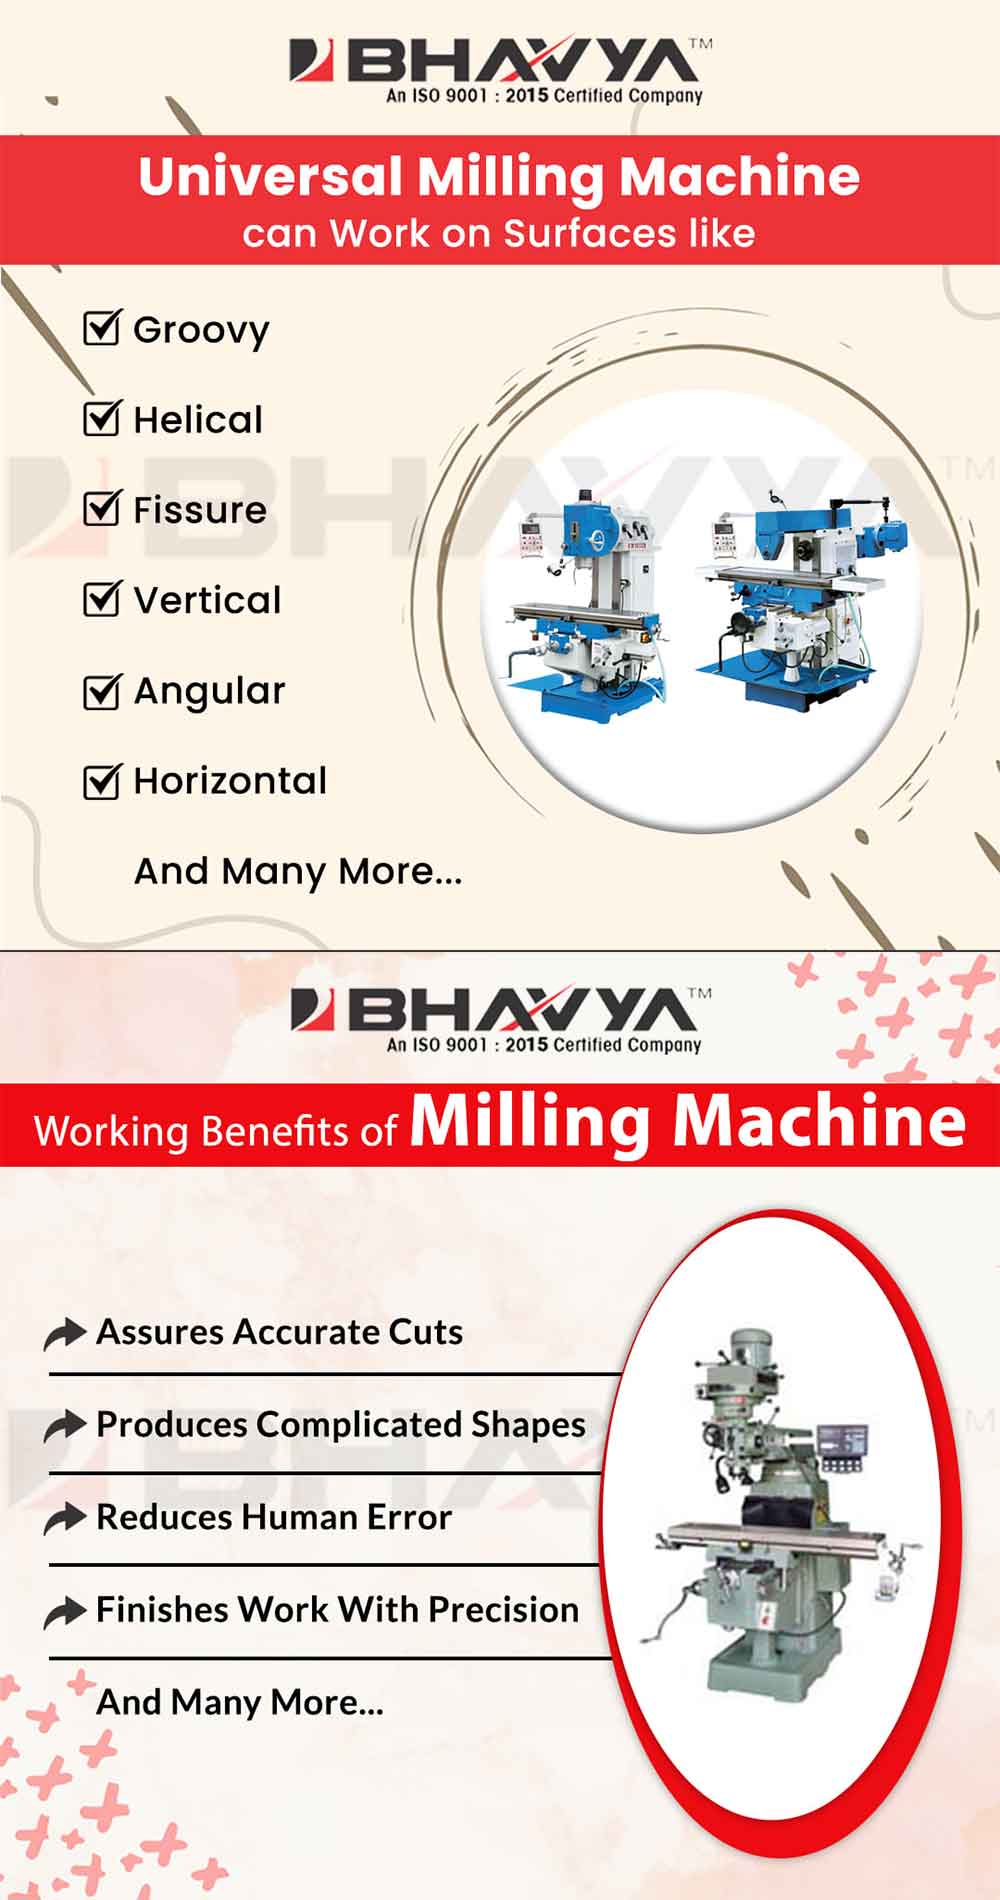 Different types of Universal Milling Machines 